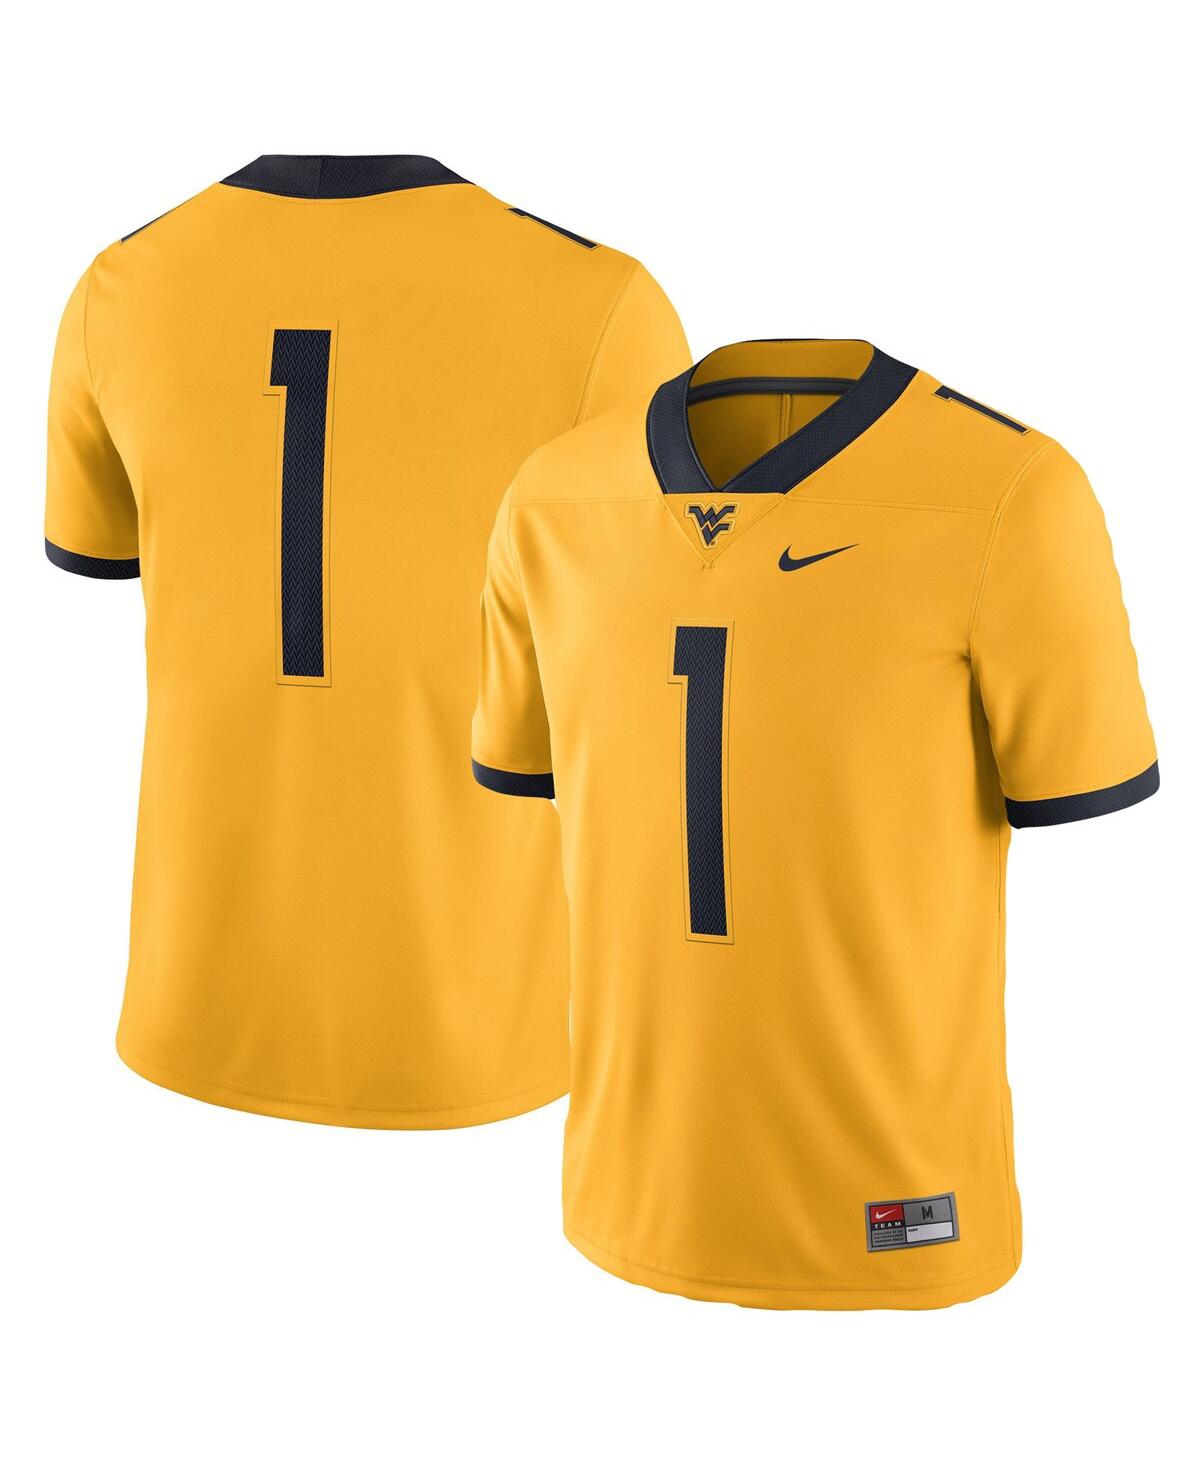 Men's Nike Gold West Virginia Mountaineers Alternate Game Jersey - Gold